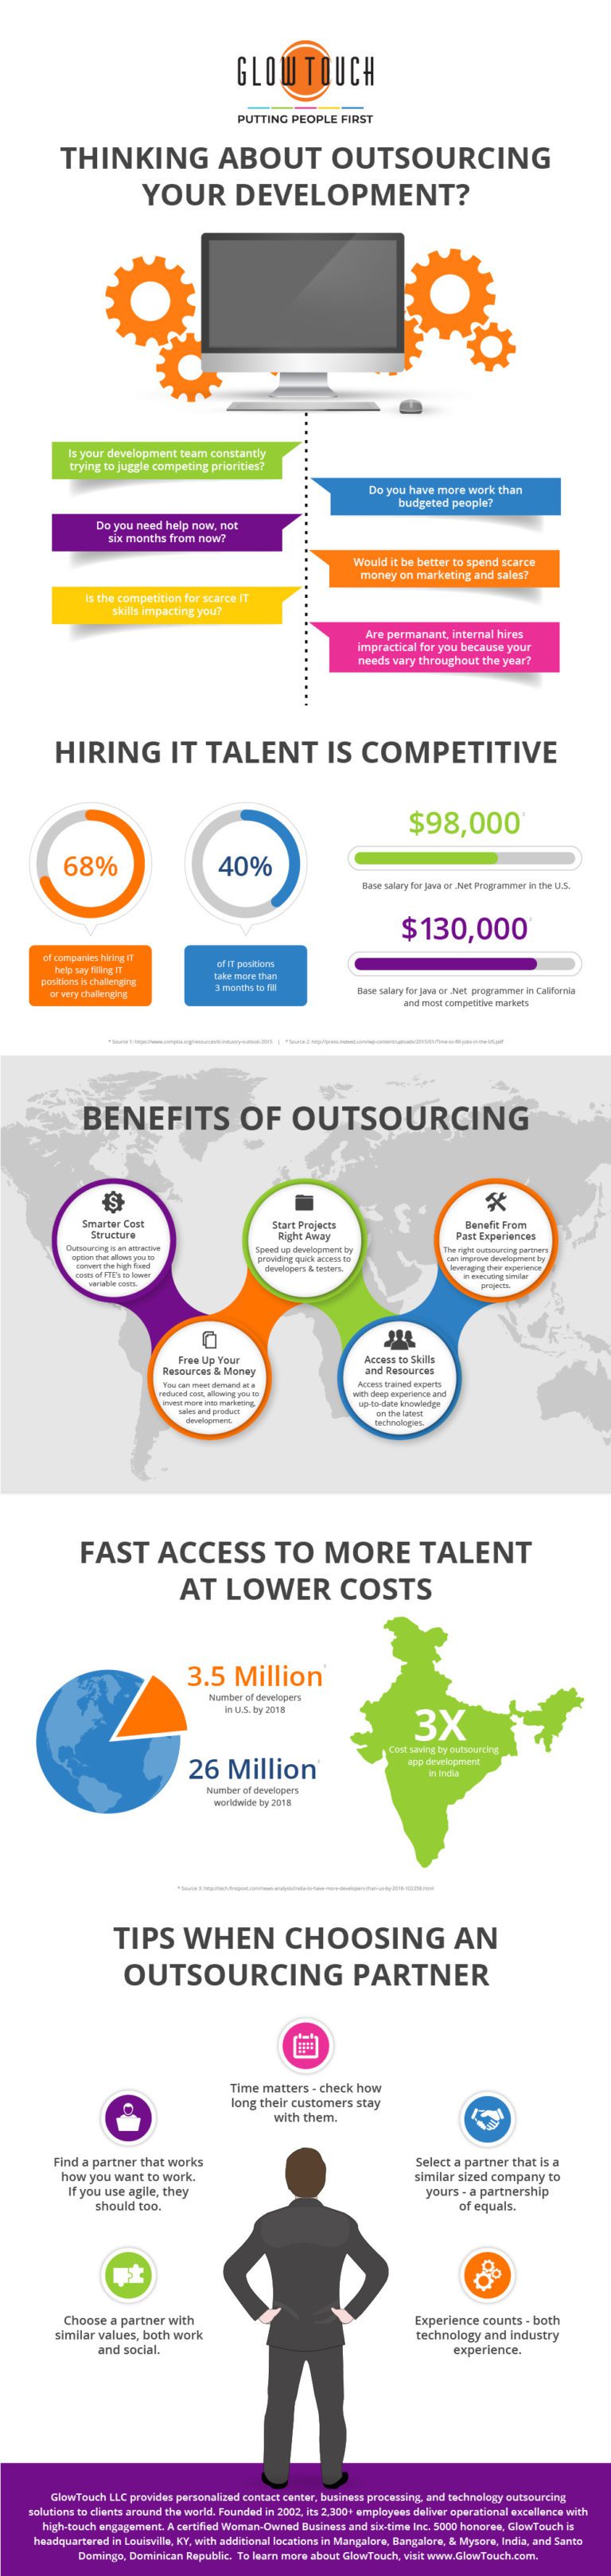 Outsourcing Development Infographic